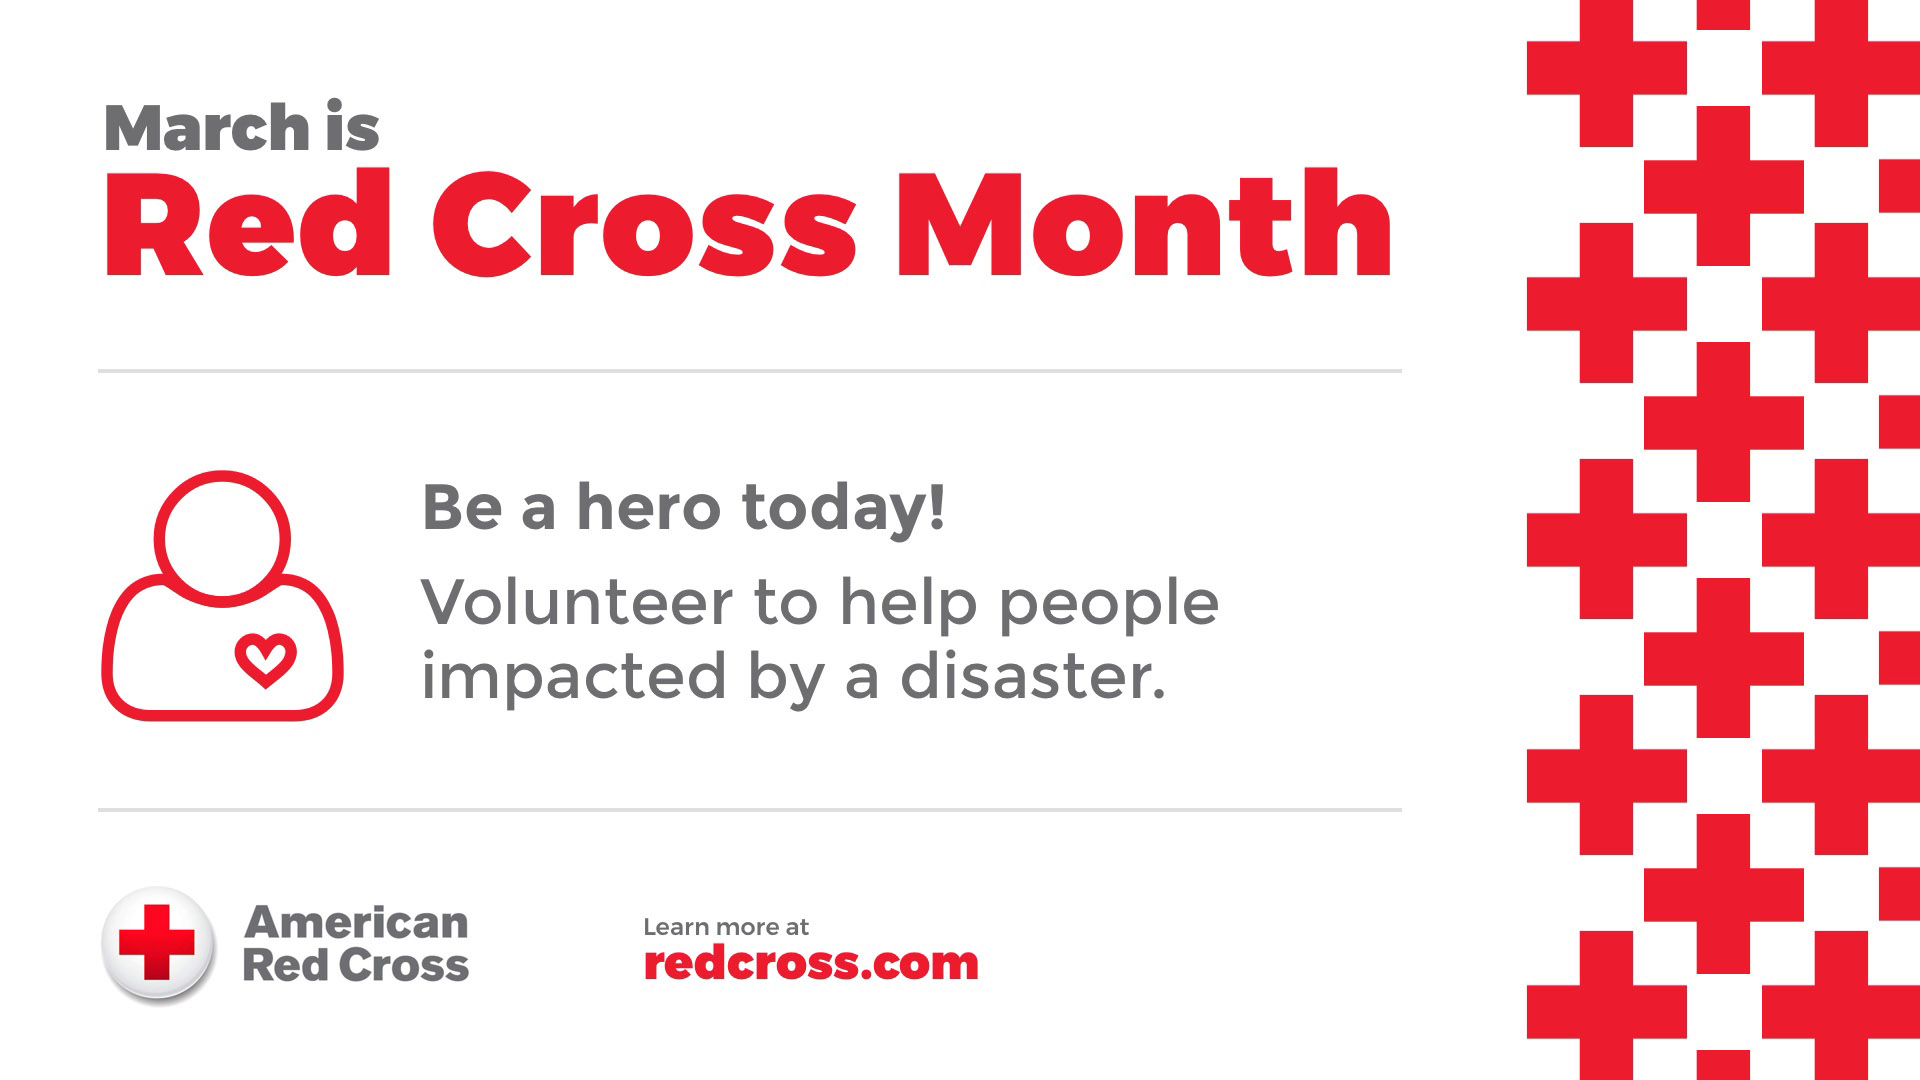 March is Red Cross Month Digital Signage Graphic